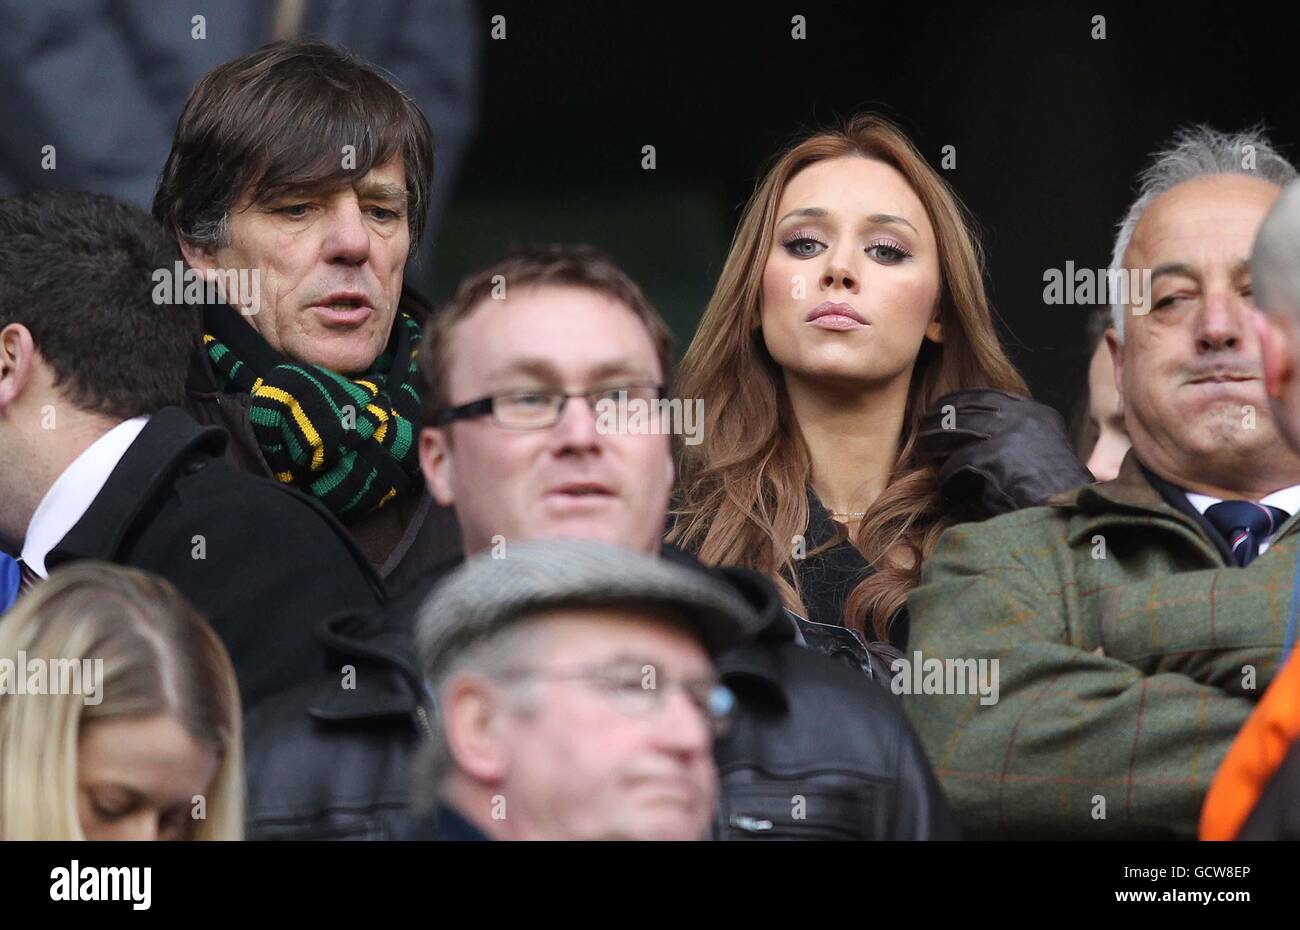 Rugby Union - Investec Perpetual Series 2010 - England v Samoa - Twickenham Stadium. England's Ben Foden's girlfriend Una healy from the pop band The Saturdays watches from the stand Stock Photo